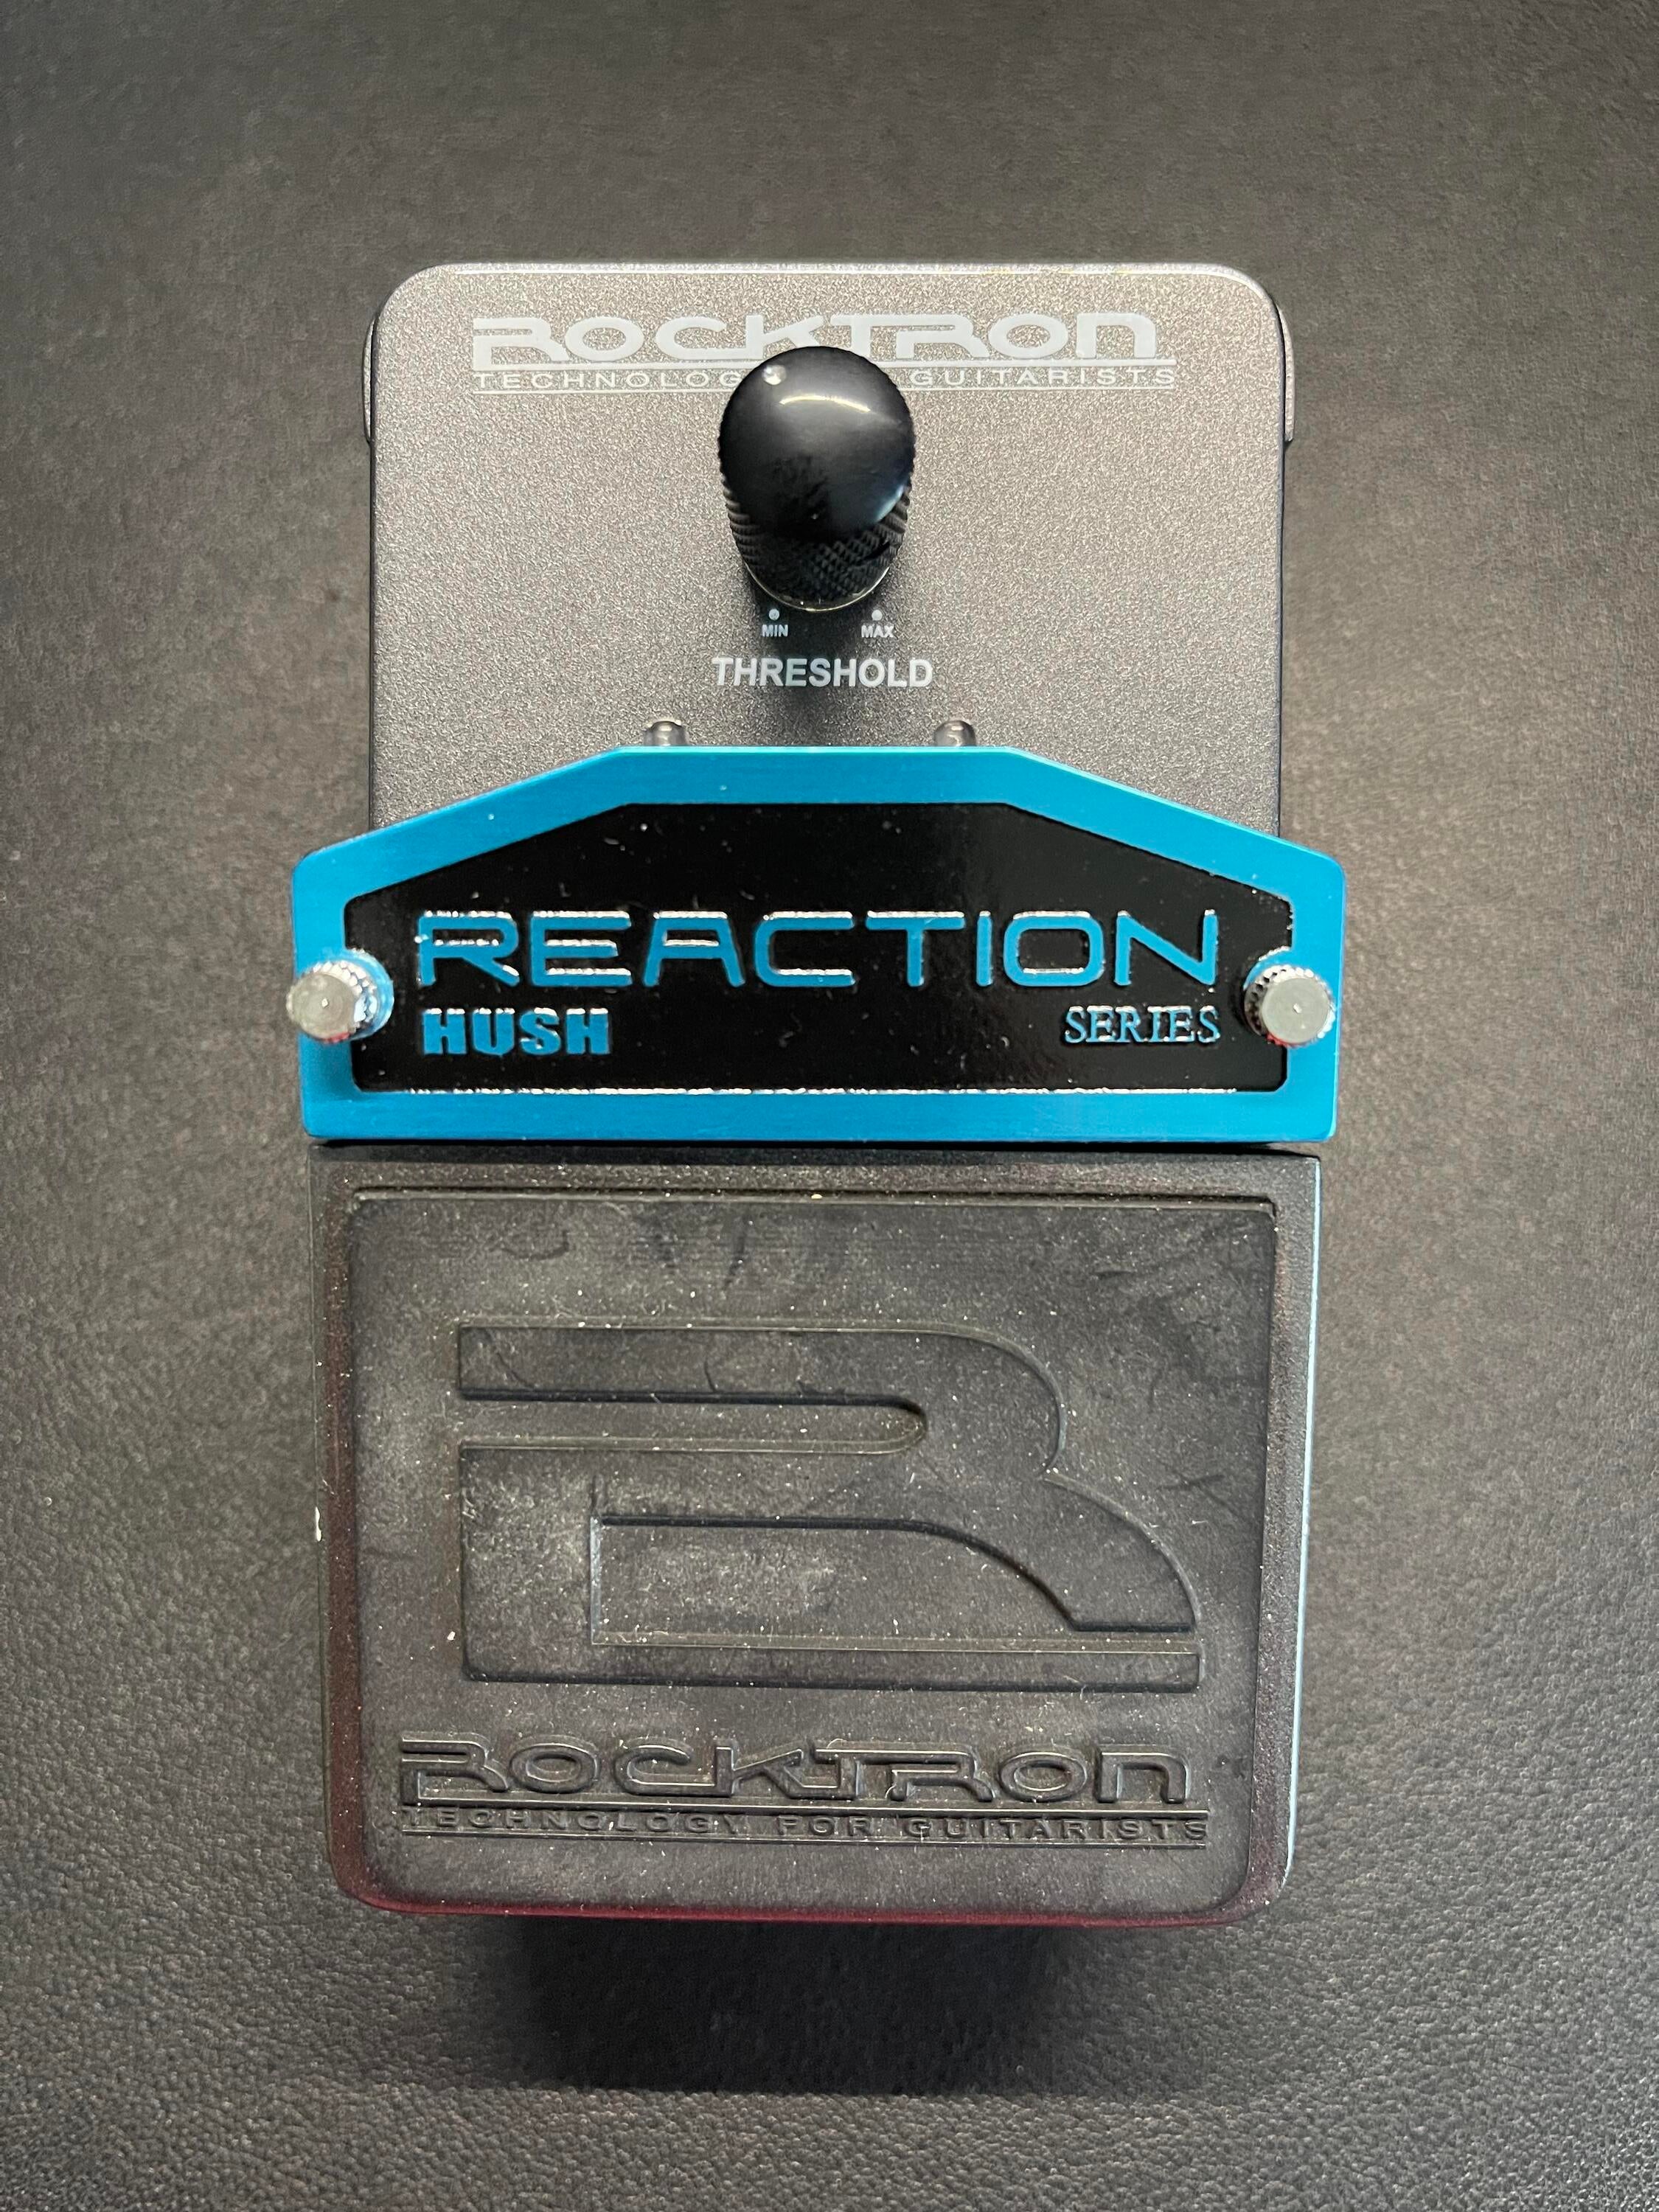 Used　Sweetwater's　Gear　Hush　Rocktron　pedal　Reaction　Exchange